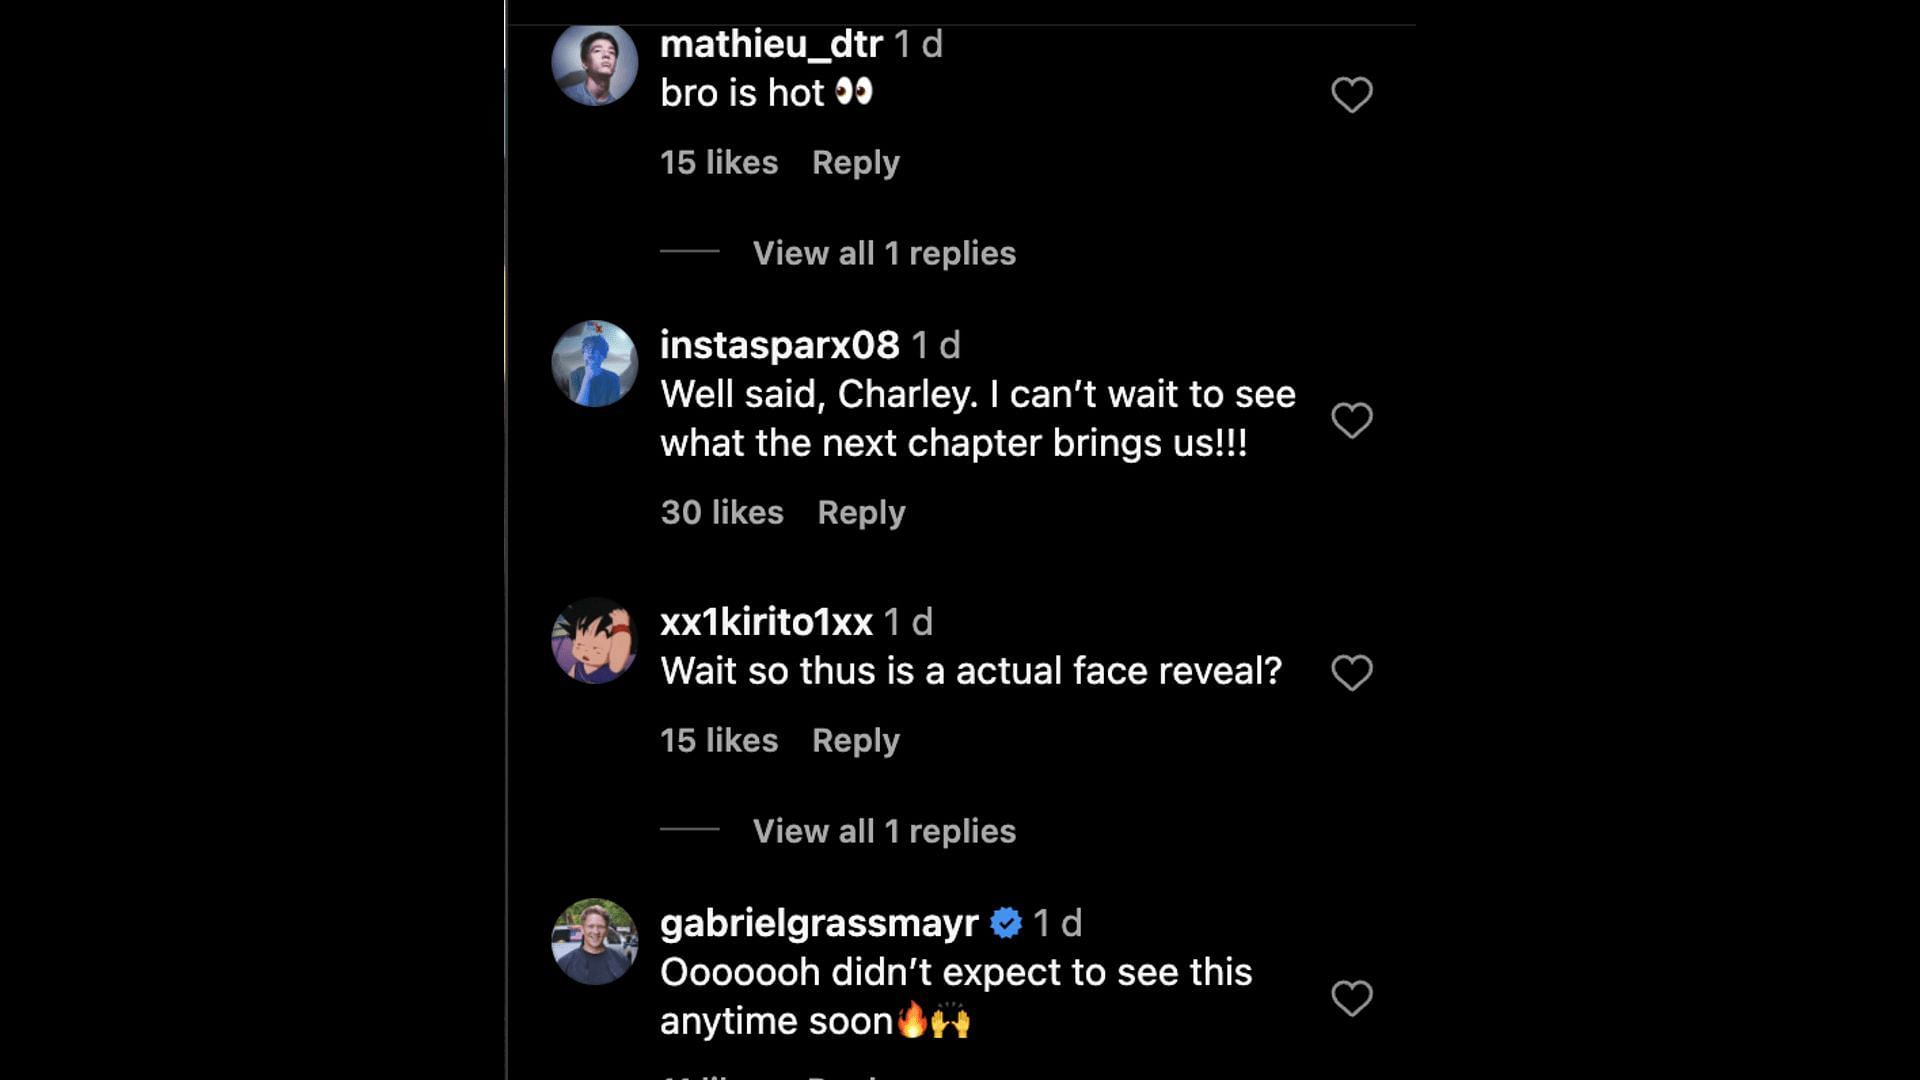 Social media users go gaga as YouTuber reveals his real face by uploading an image on Instagram: Reactions explored (Image via Instagram)